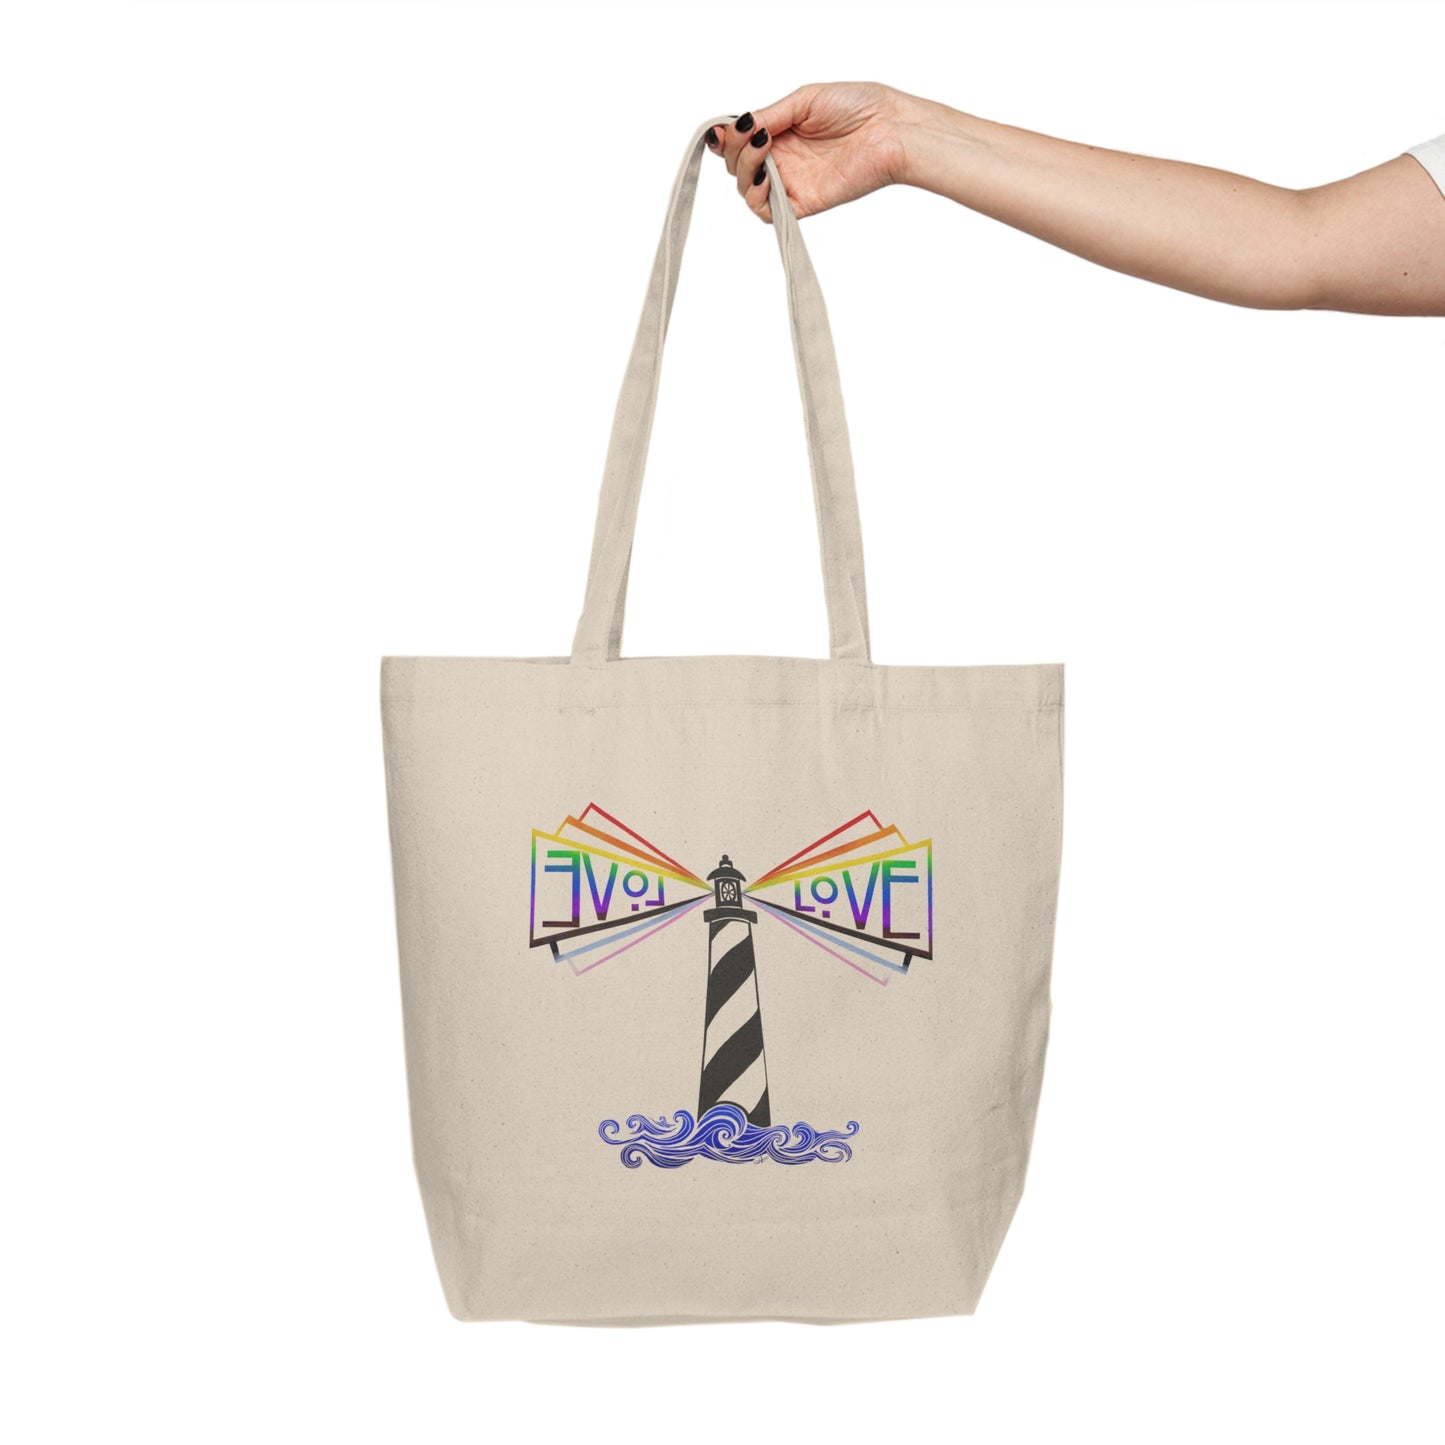 Be a Lighthouse - Canvas Shopping Tote